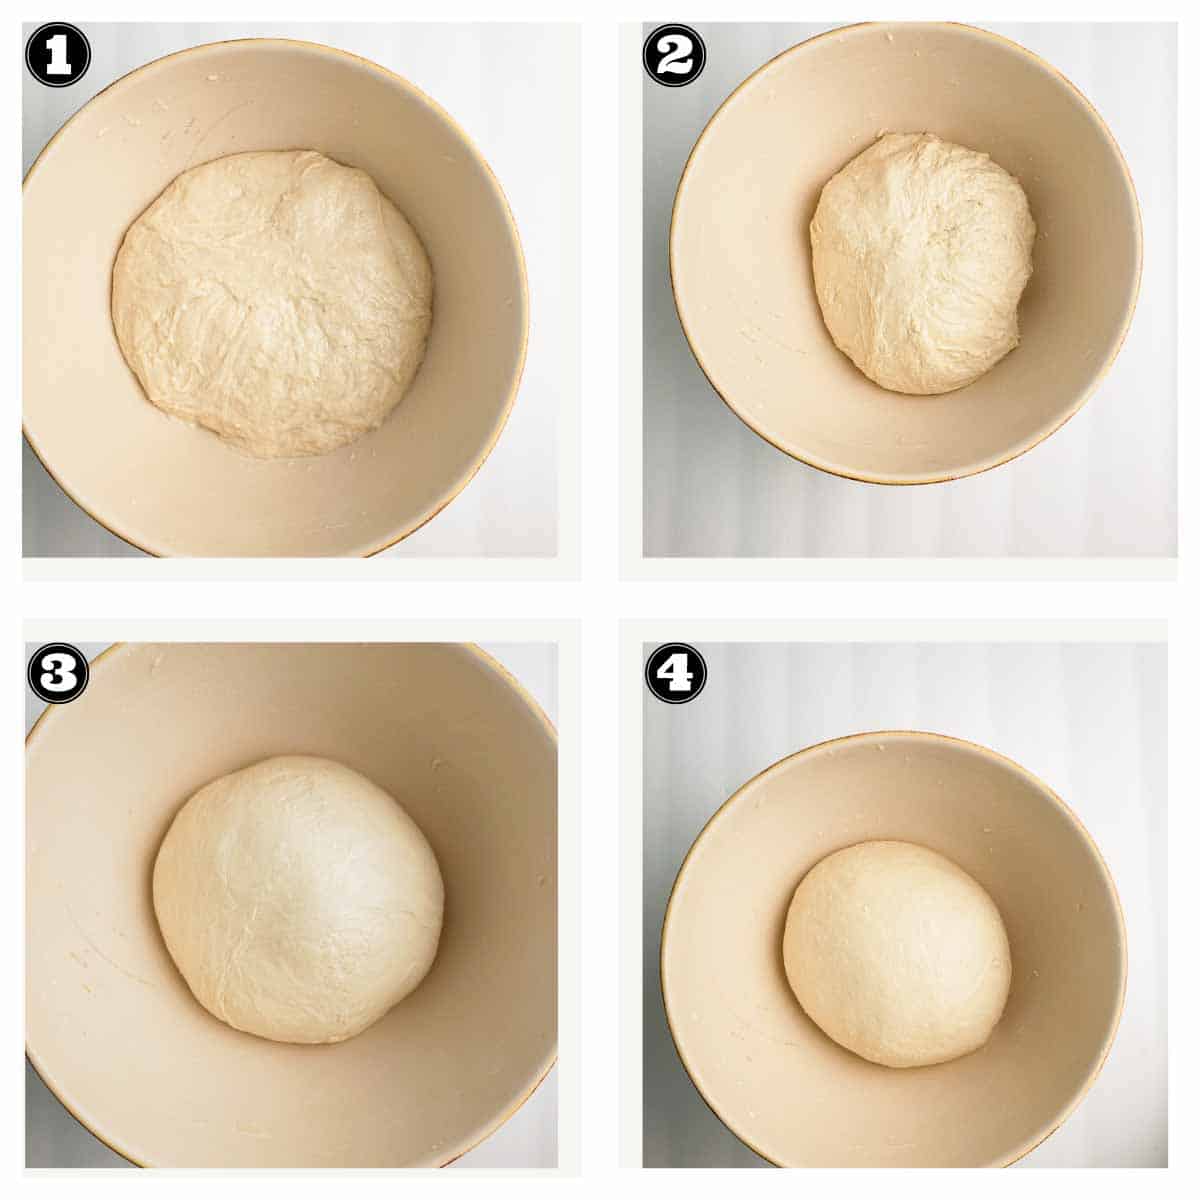 images showing strengthening of dough